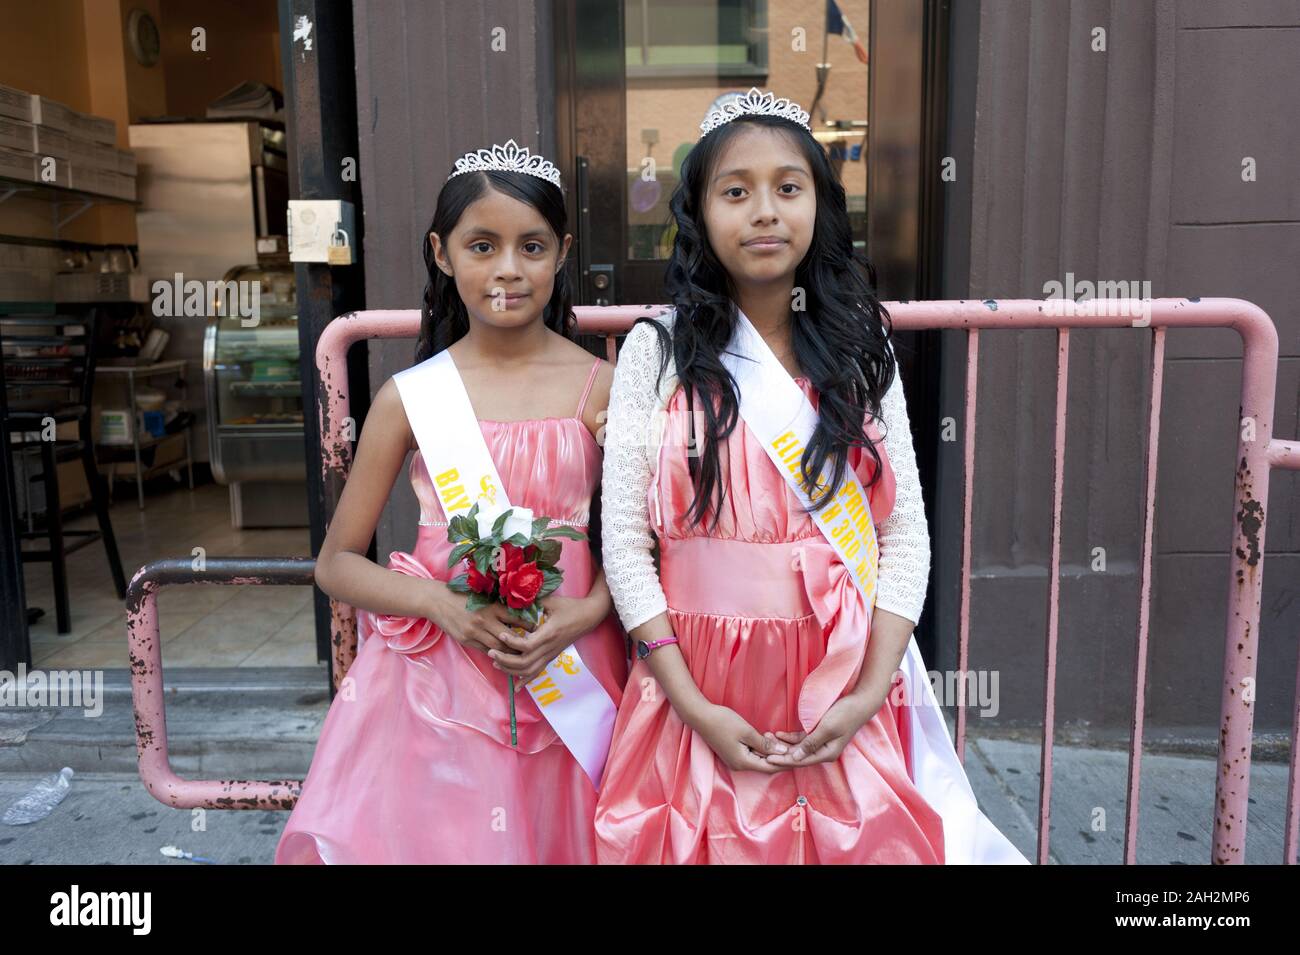 Mexican-American parade princesses at The Children's Evangelical Parade in East Harlem in NYC. Stock Photo